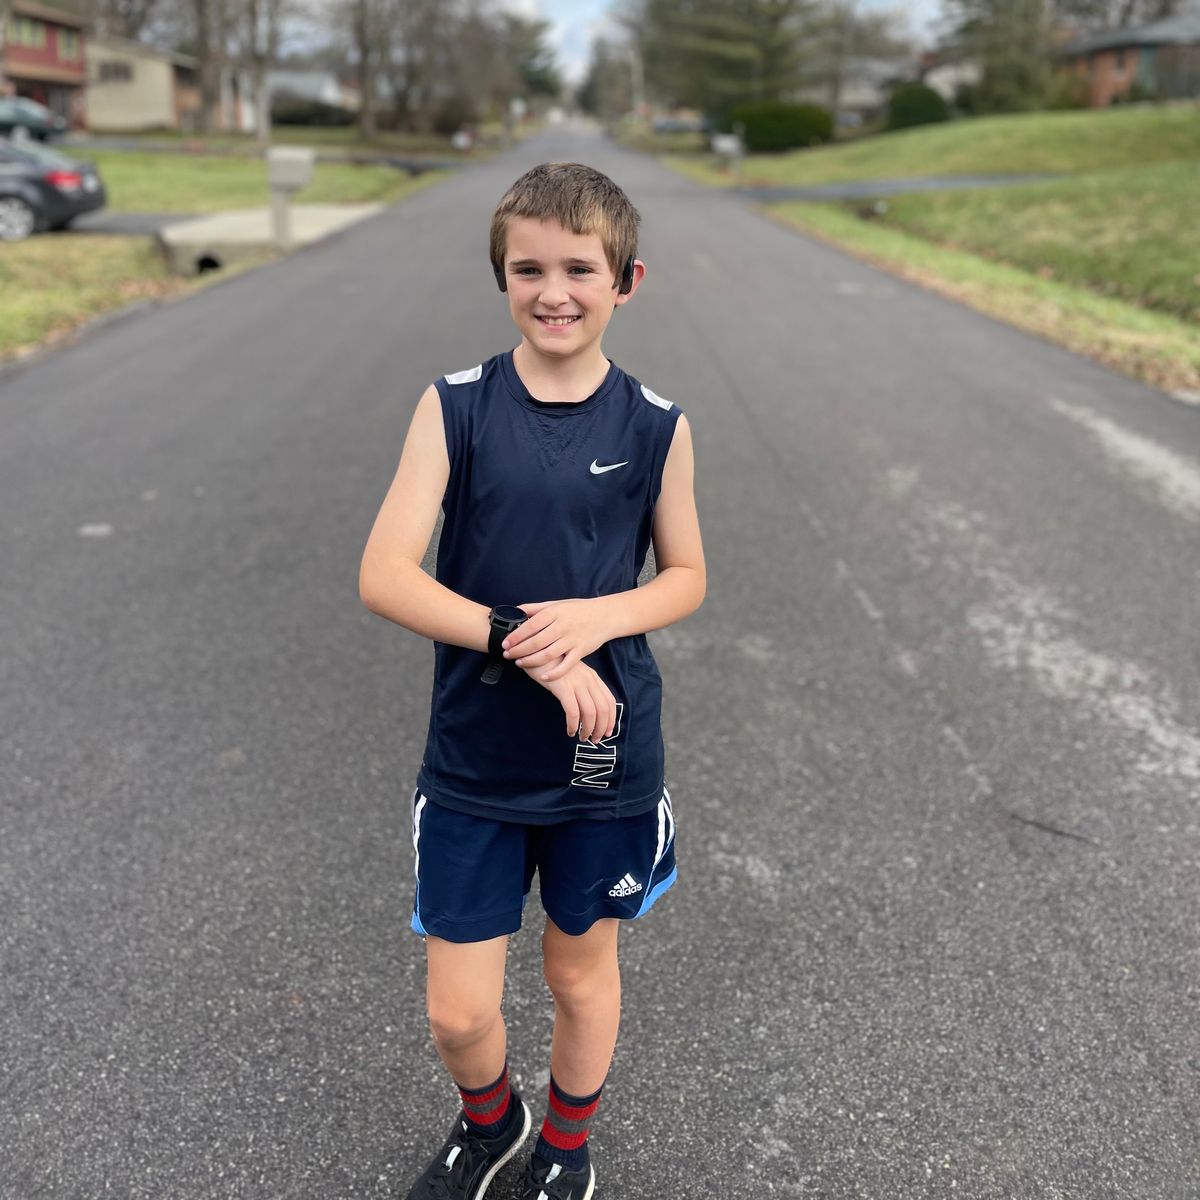 Reflections on a year of running with a 10-year-old half-marathoner